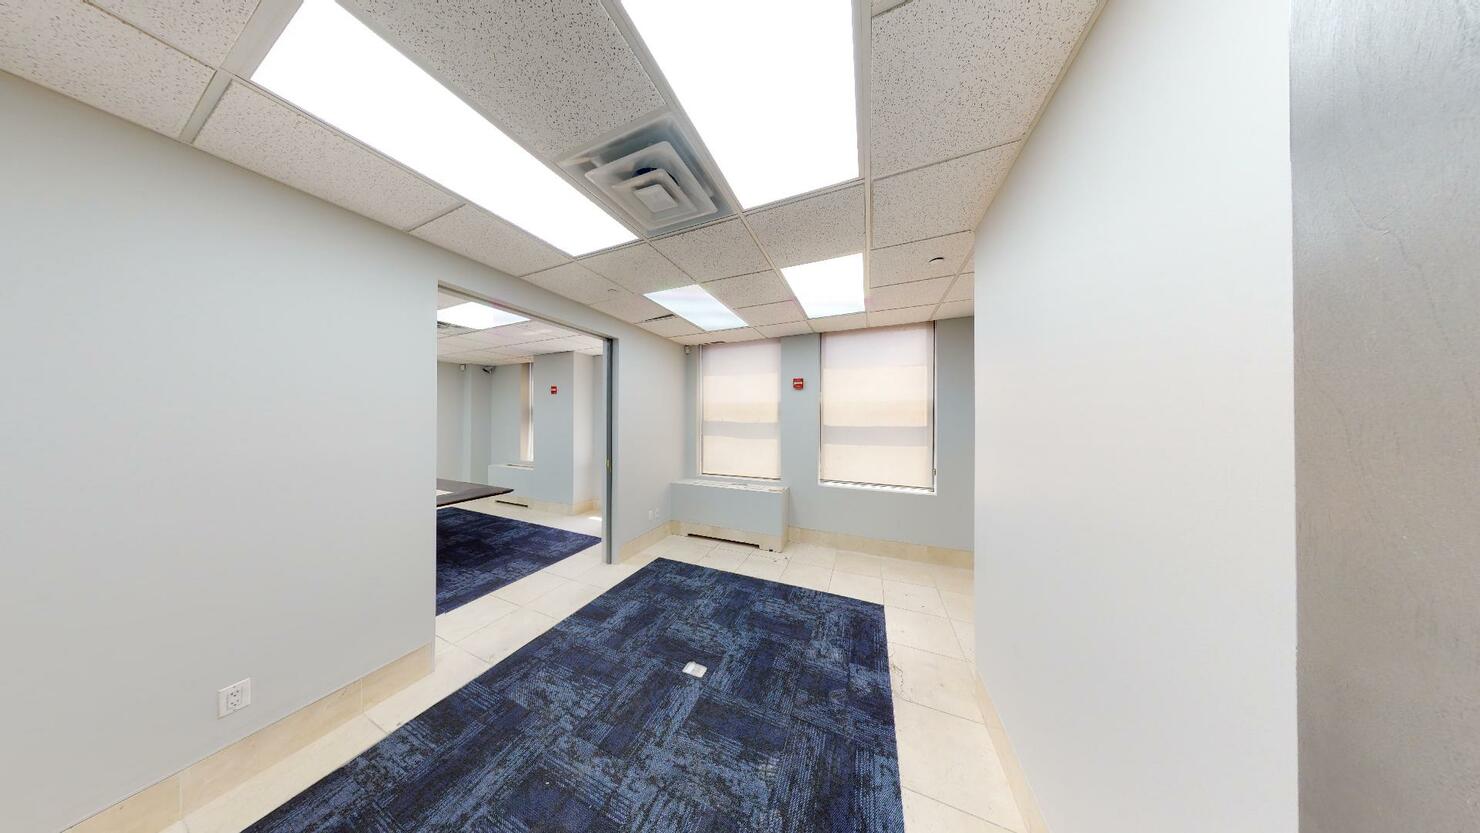 255 West 36th Street Office Space - Office Room with a Sliding Door